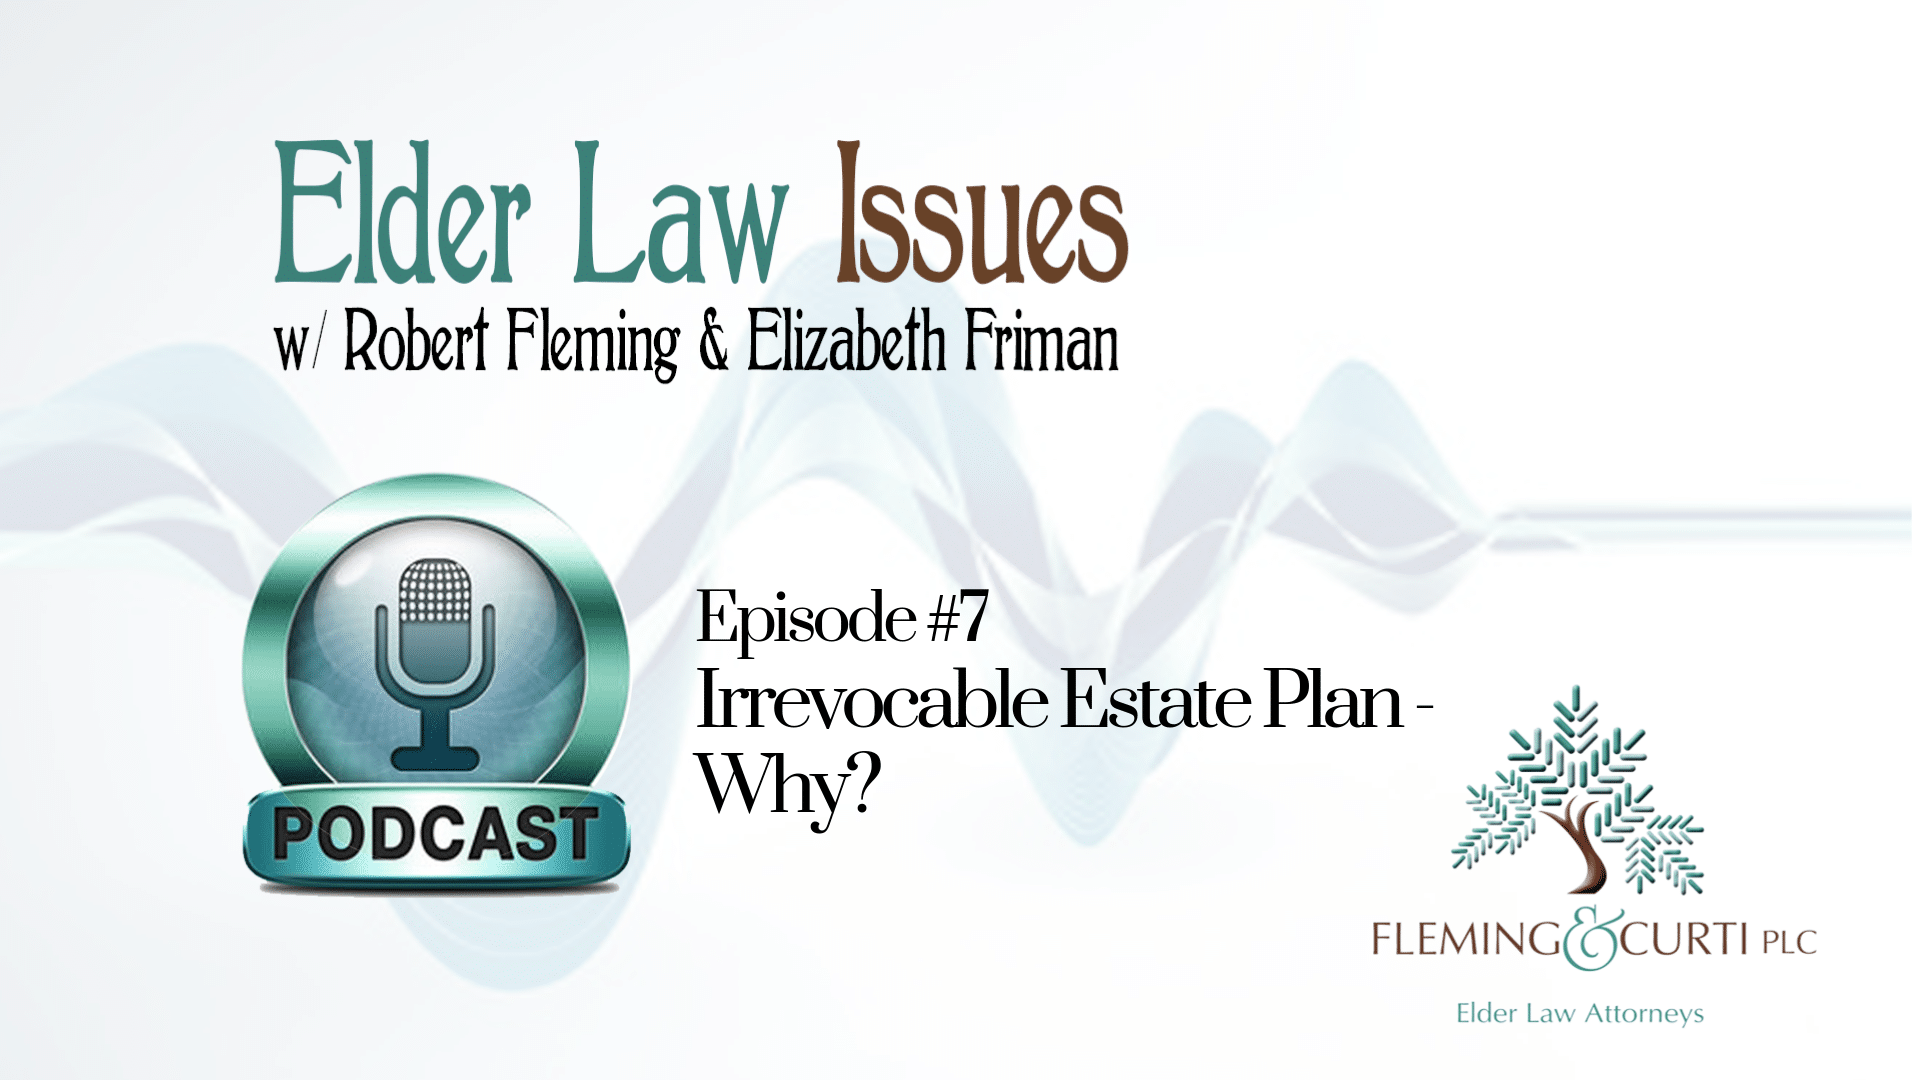 Irrevocable estate plan - why?